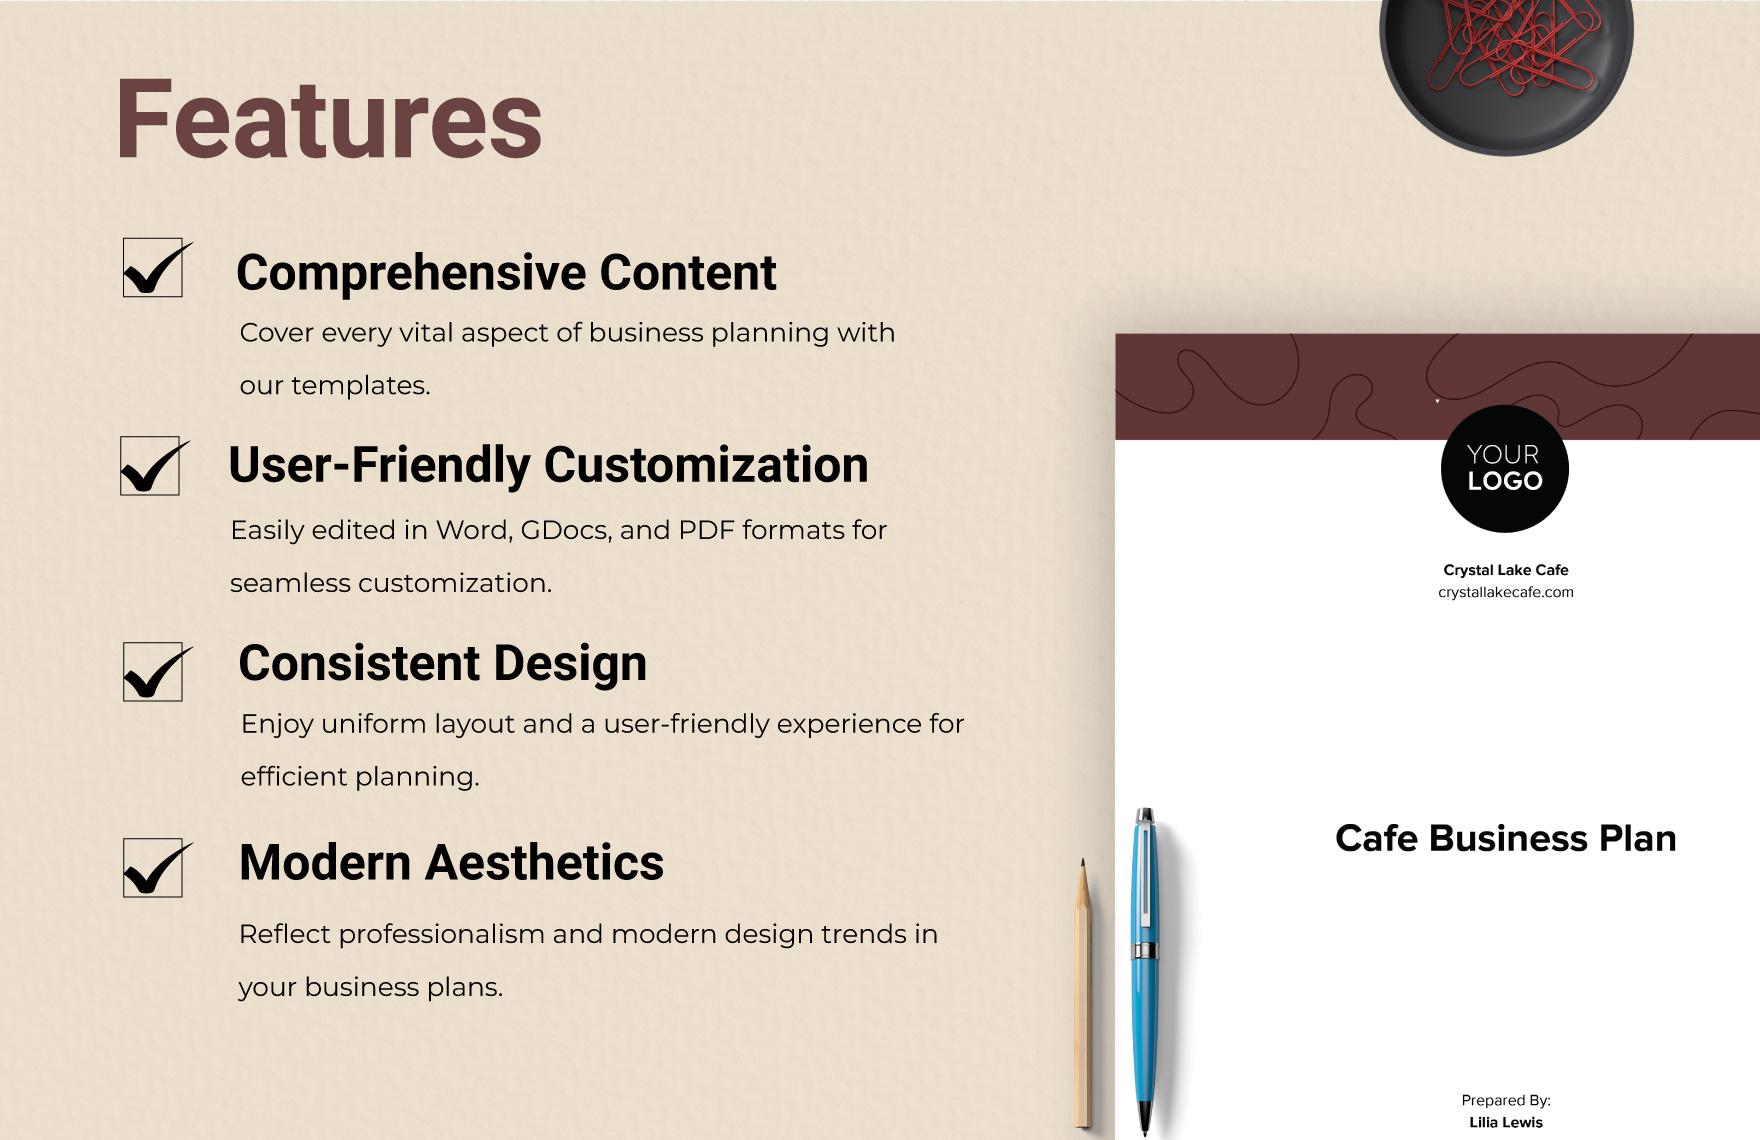 Cafe Business Plan Template